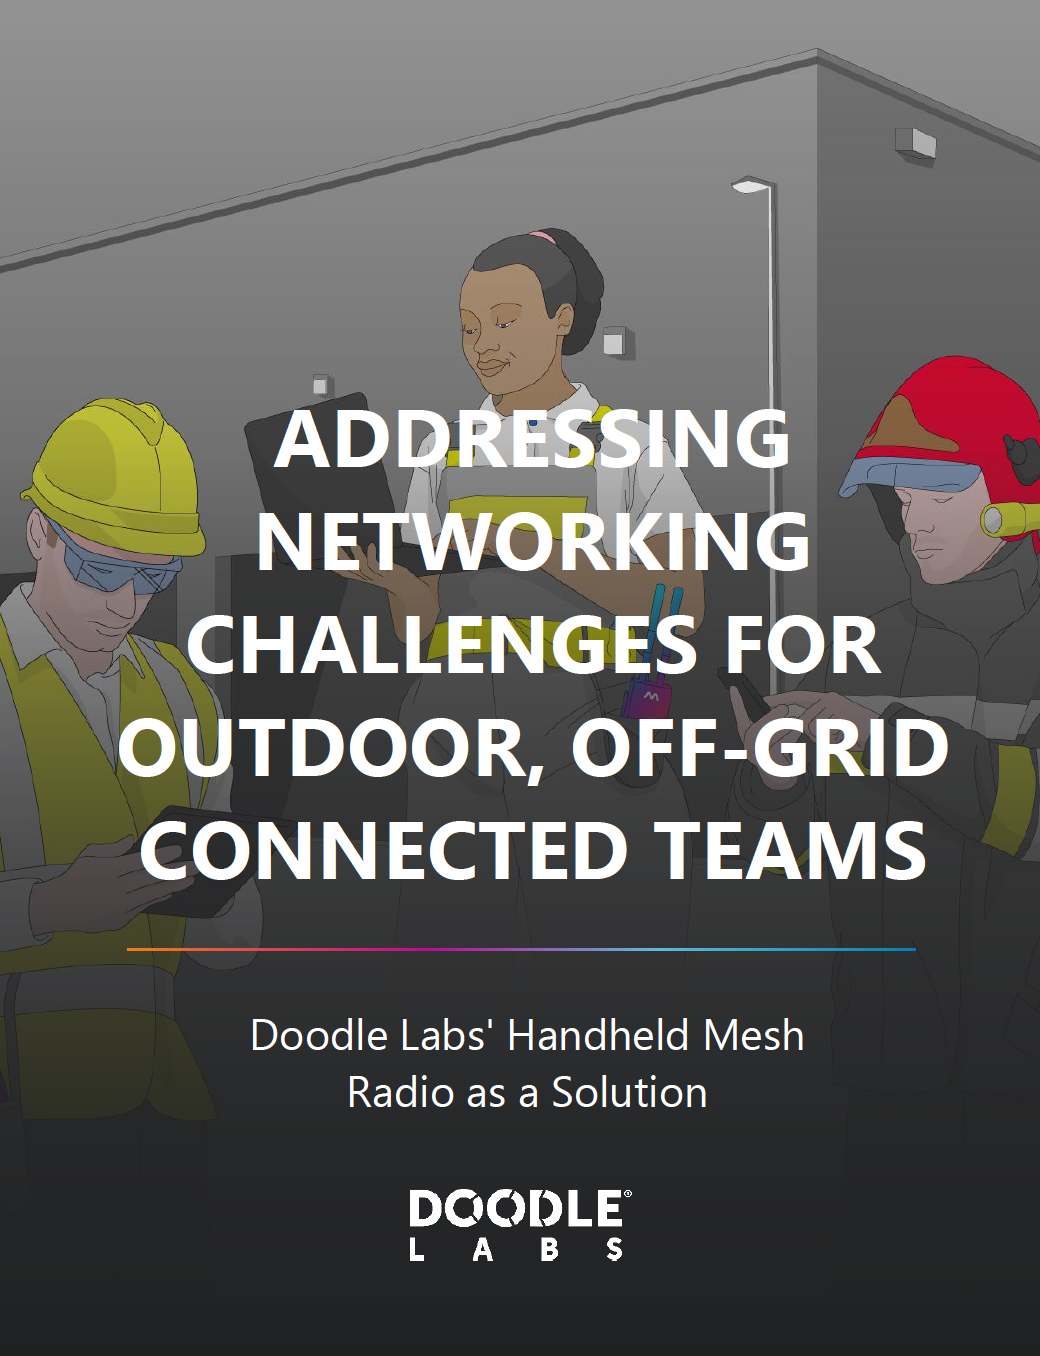 Doodle Labs Whitepaper - Off-grid Connected Teams Networking